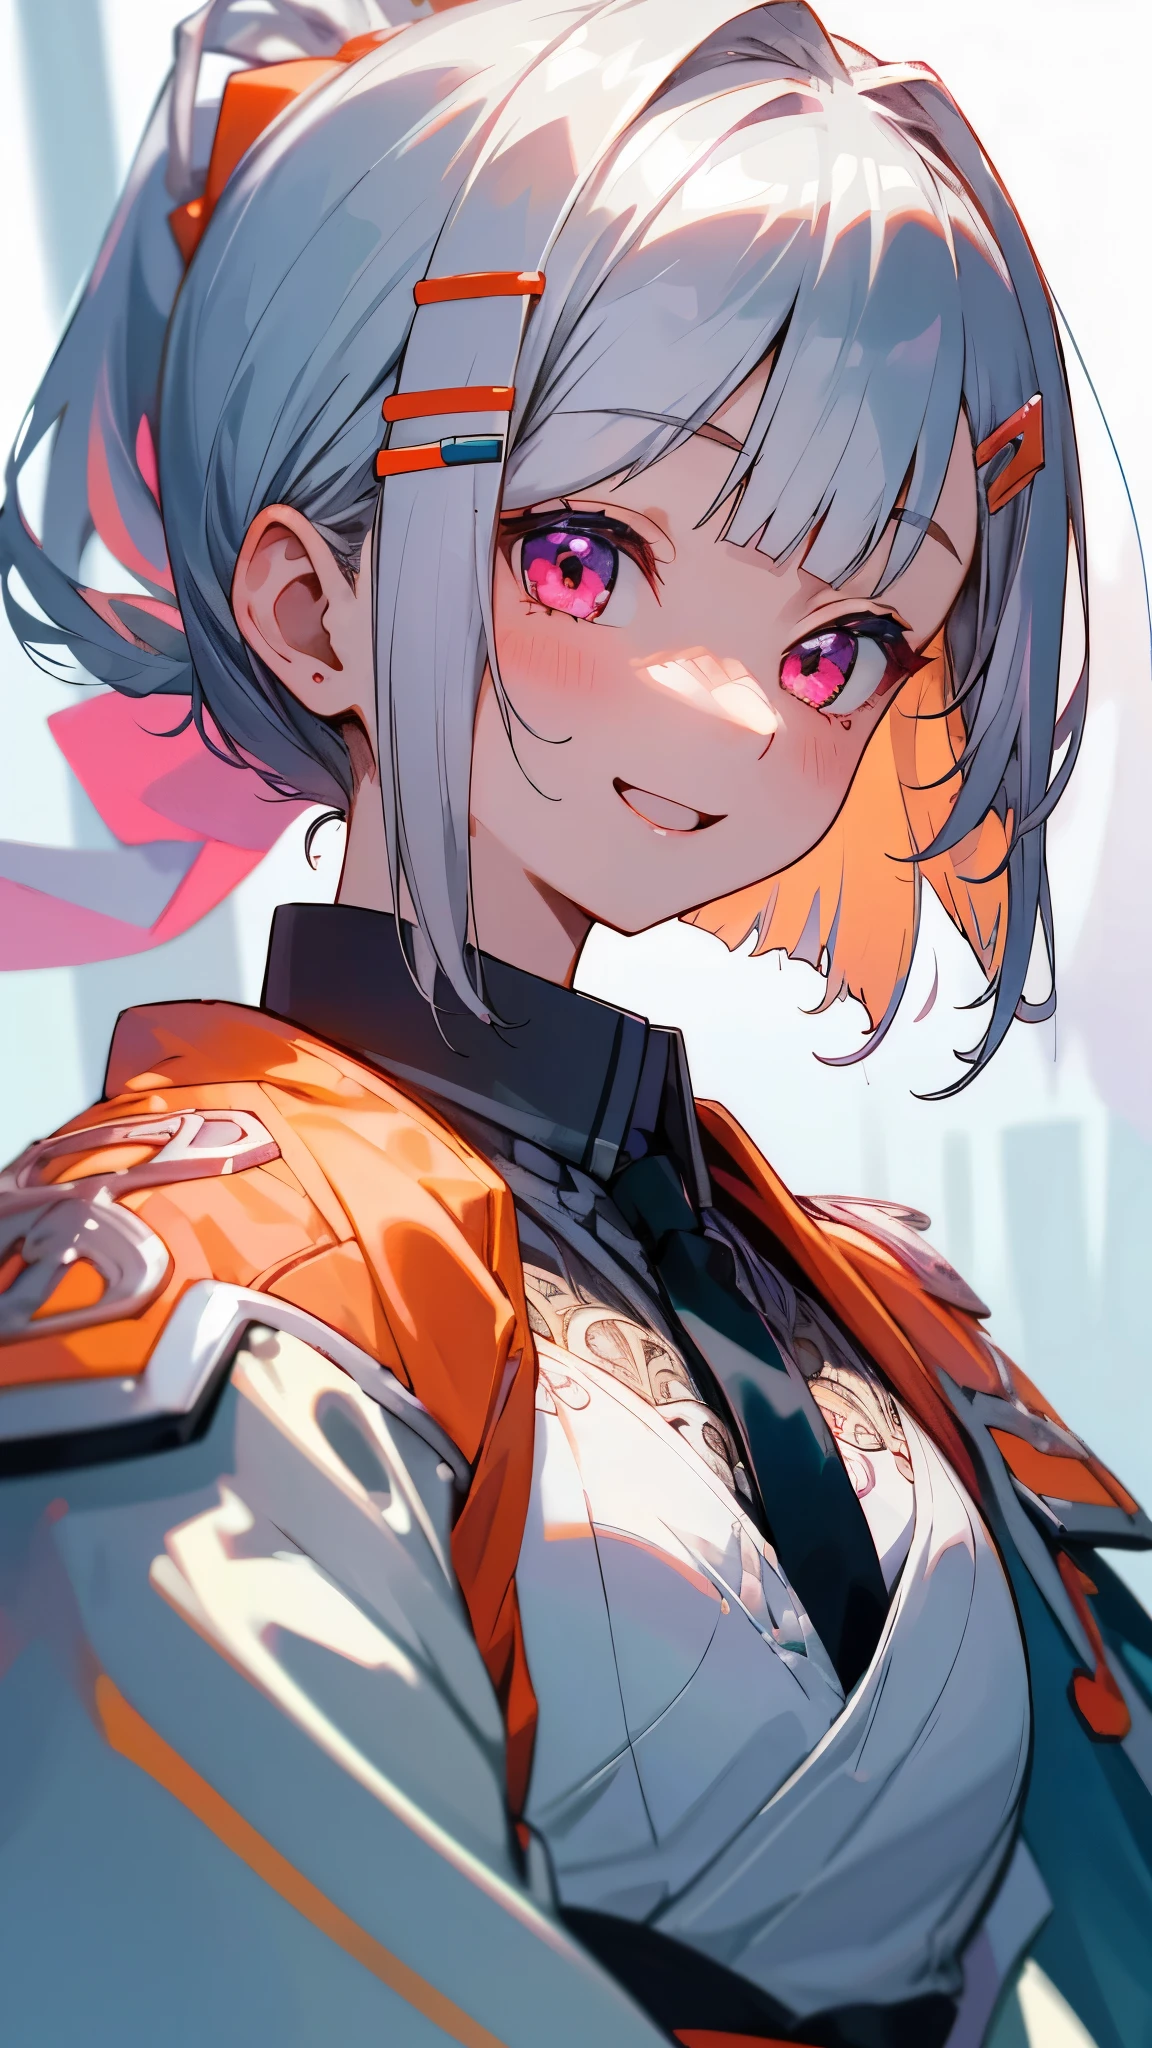 1 girl、8k、Sharp focus、(Bokeh) (highest quality) (Detailed skin:1.3) (Intricate details) (anime)、16-year-old girl、Riders jacket、Small breasts、Silver hair and short bob hairstyle、Tie your hair up with a hair clip、Beautiful pink eyes、smile、Laughing with your mouth open、From the side、Blue and orange tones、Upper body close-up